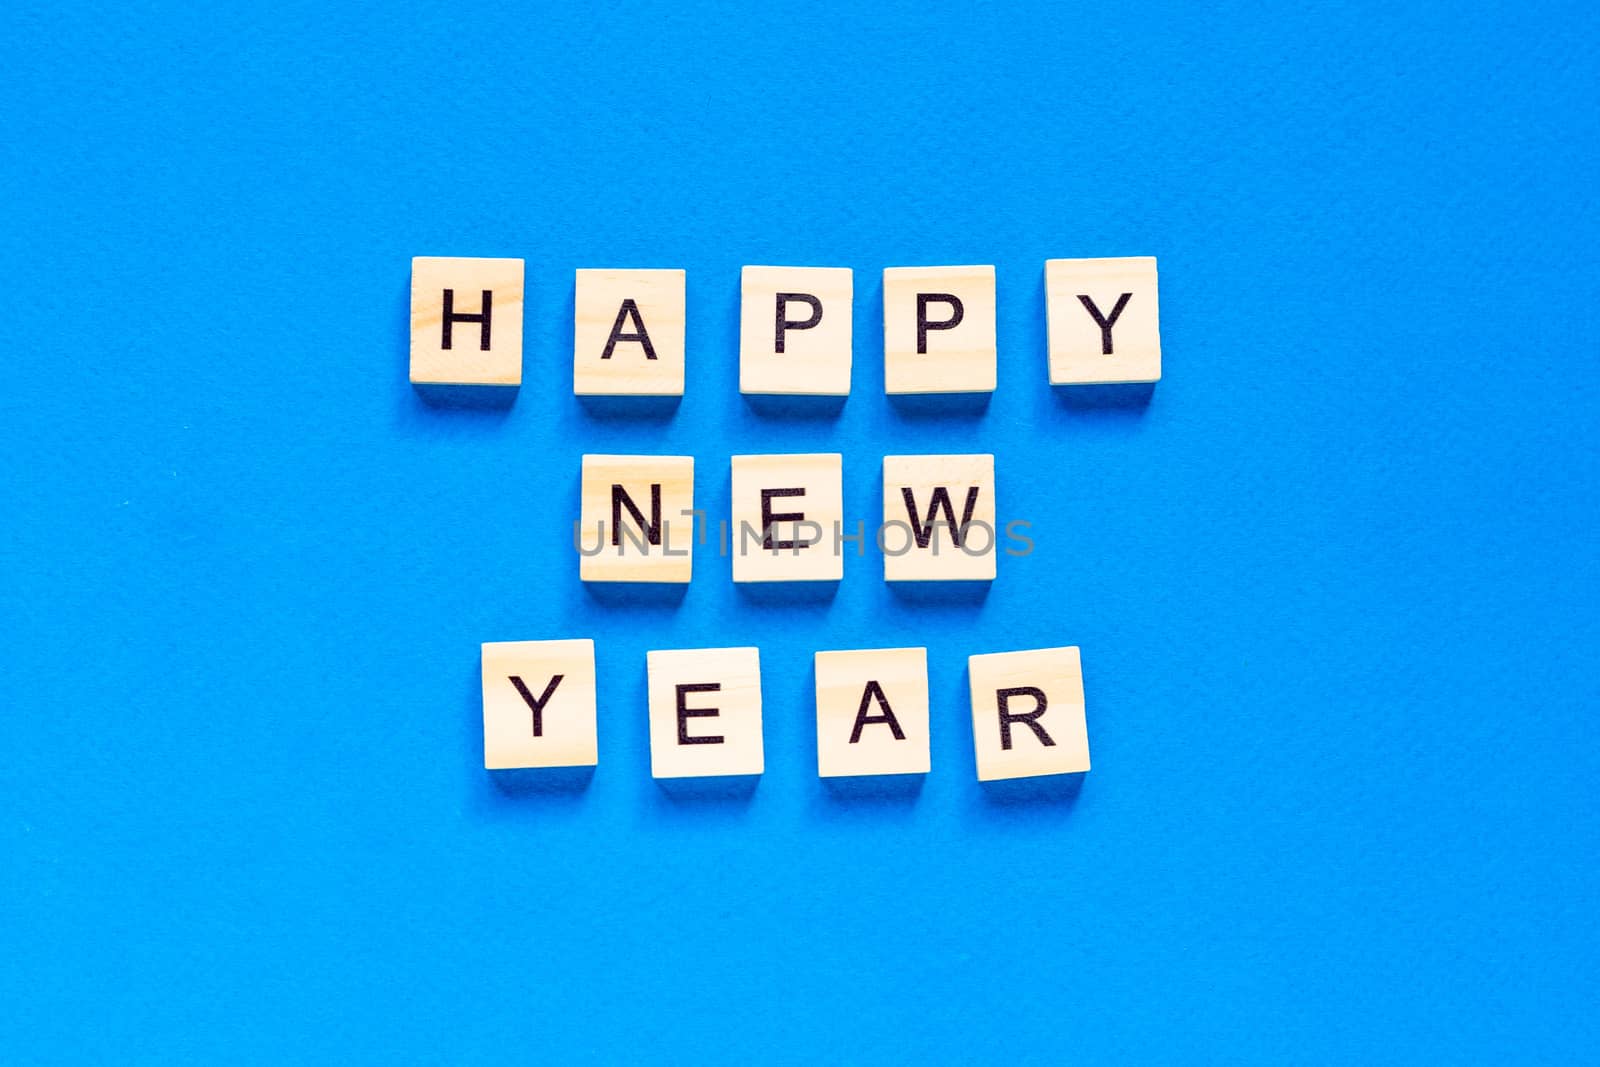 Happy New year written in wooden letters on a blue background. Happy new year 2021. top view. flat layout. space for text.